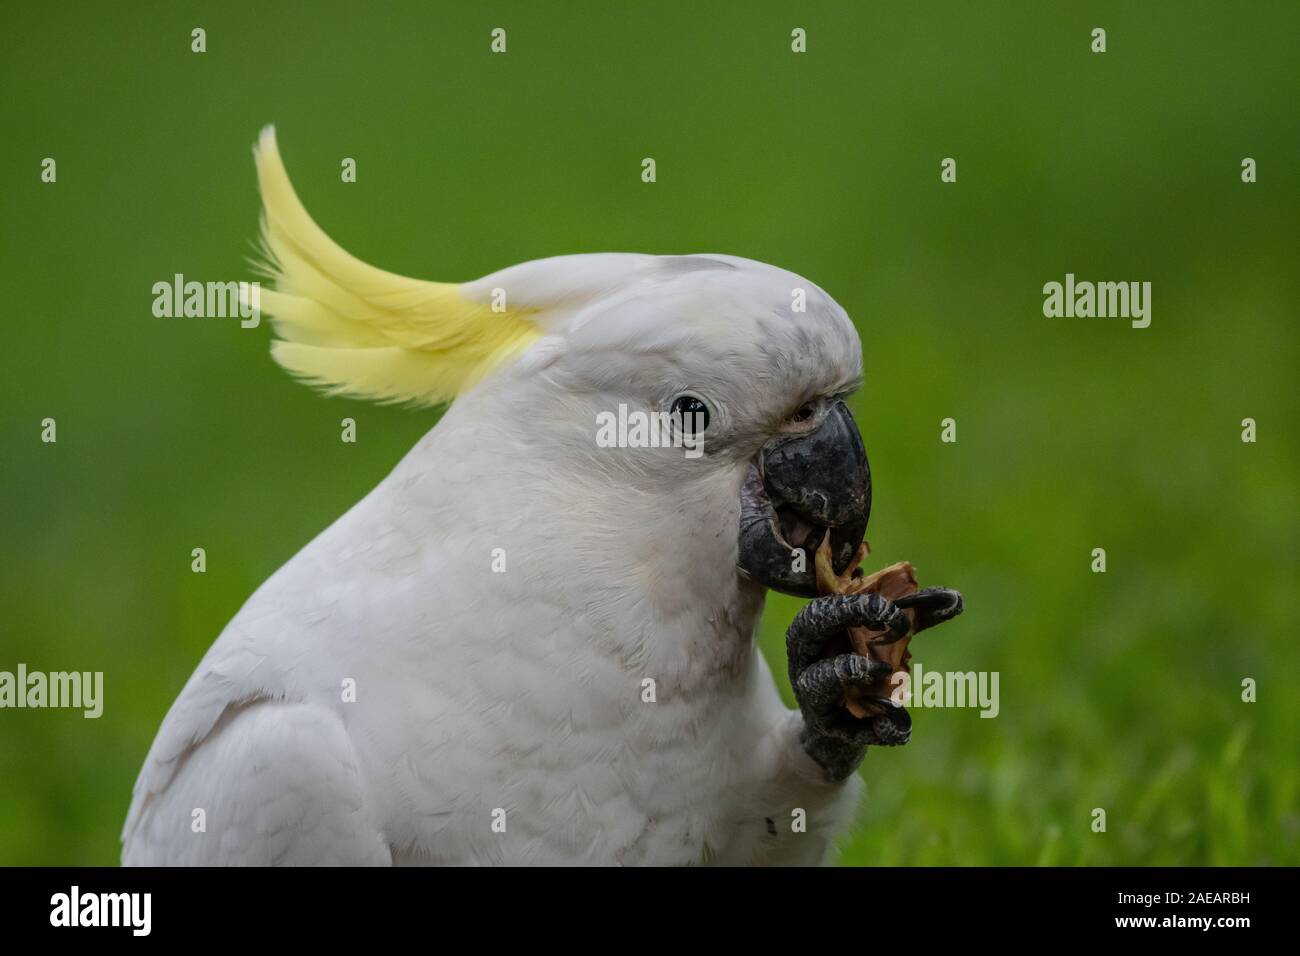 Sulphur-crested Cockatoo [Cacatua galerita] eating and playing with pine cone Stock Photo